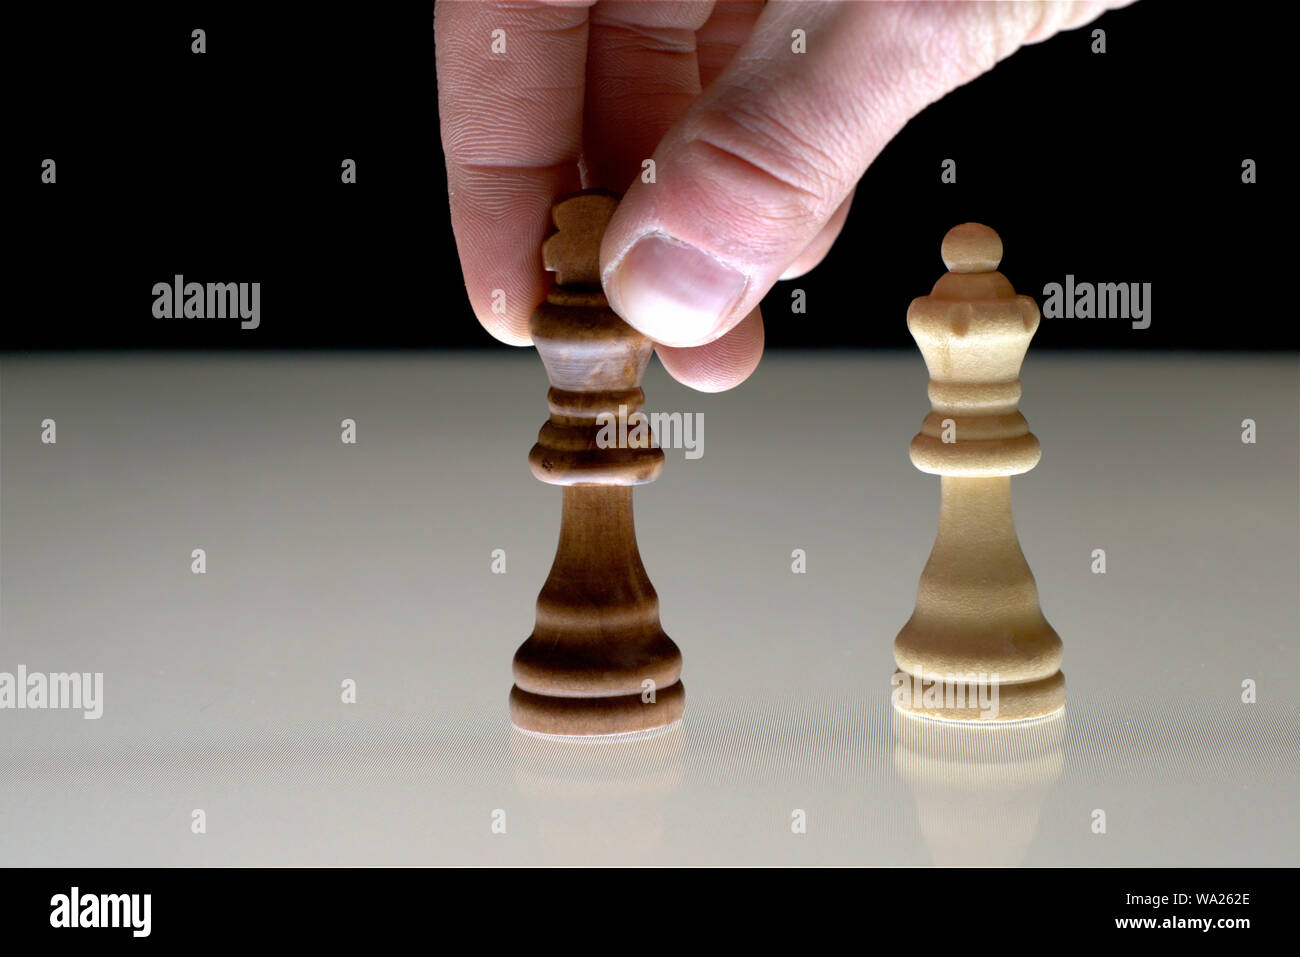 Hand moving a black chess king next to the white queen, as a concept for rivalry, competition, power games. Stock Photo